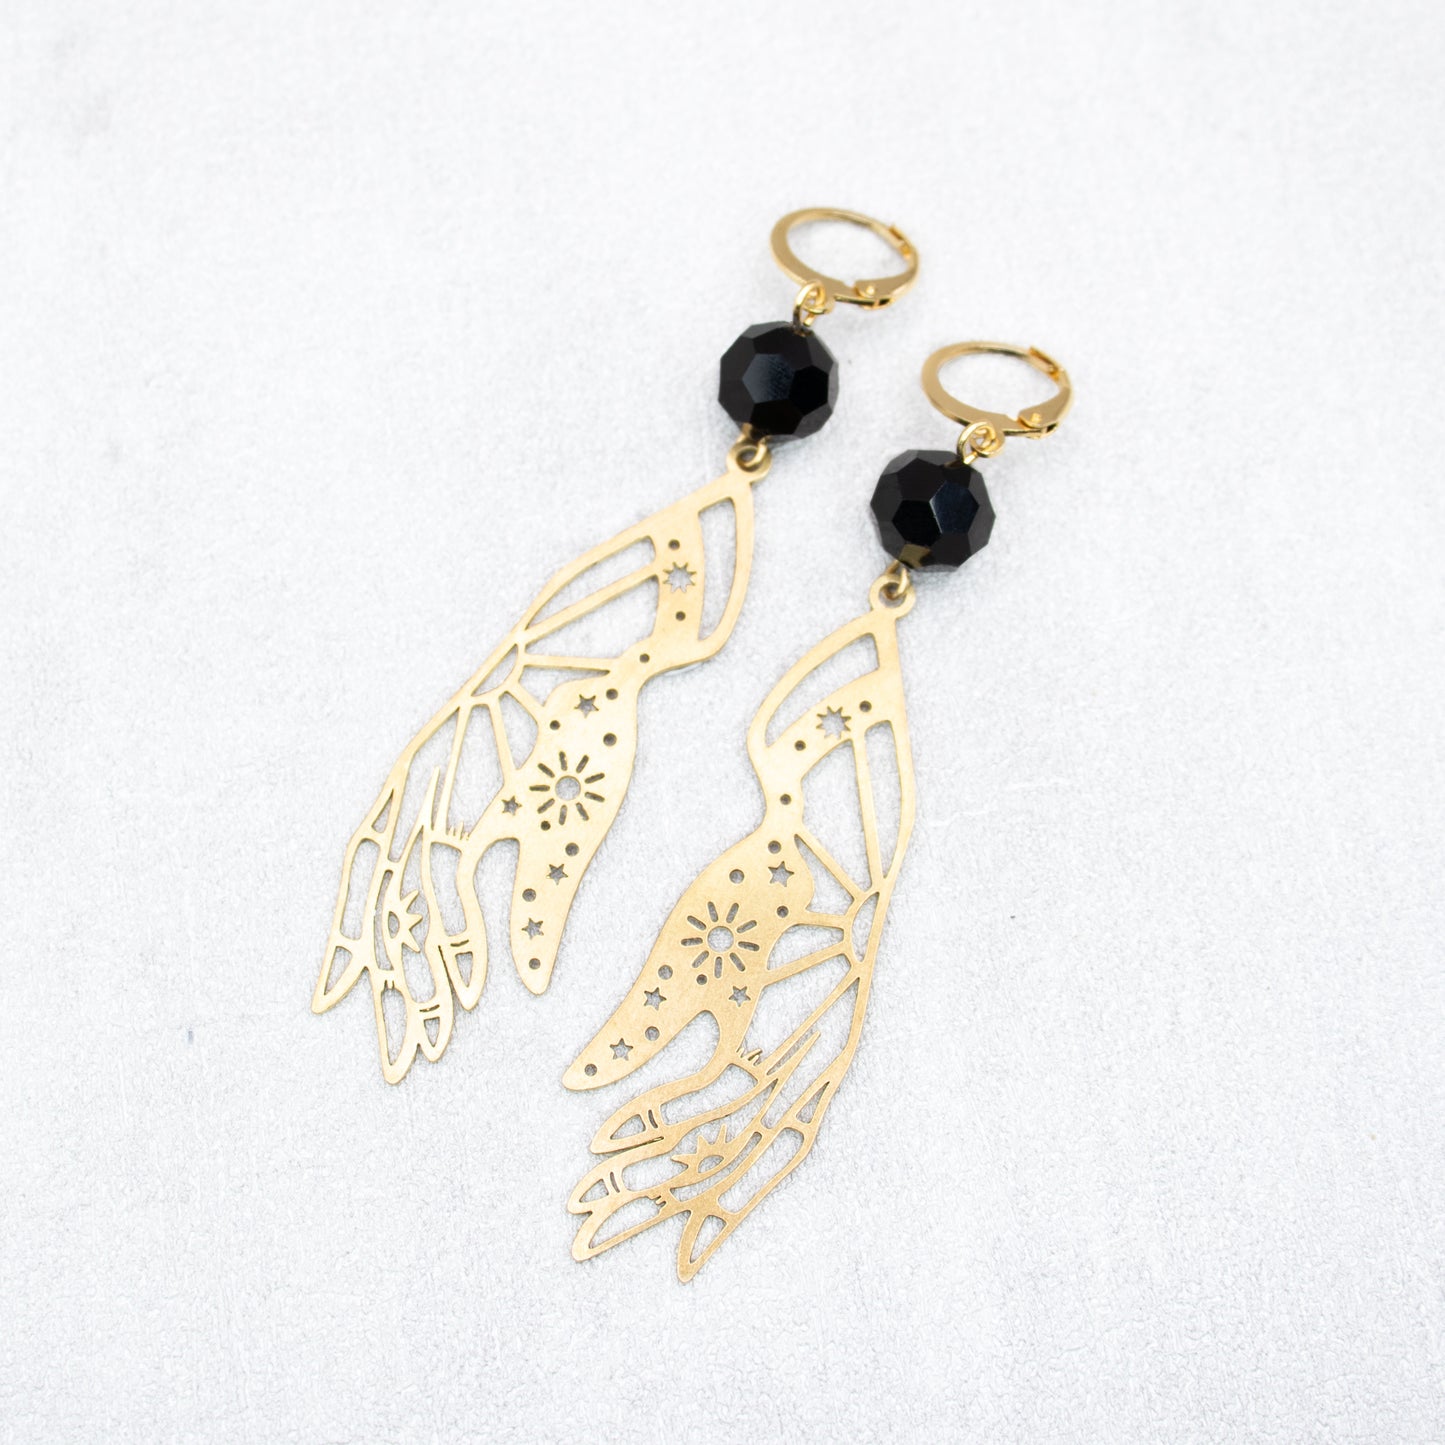 Black beads with gold hand charms. Handmade earrings.